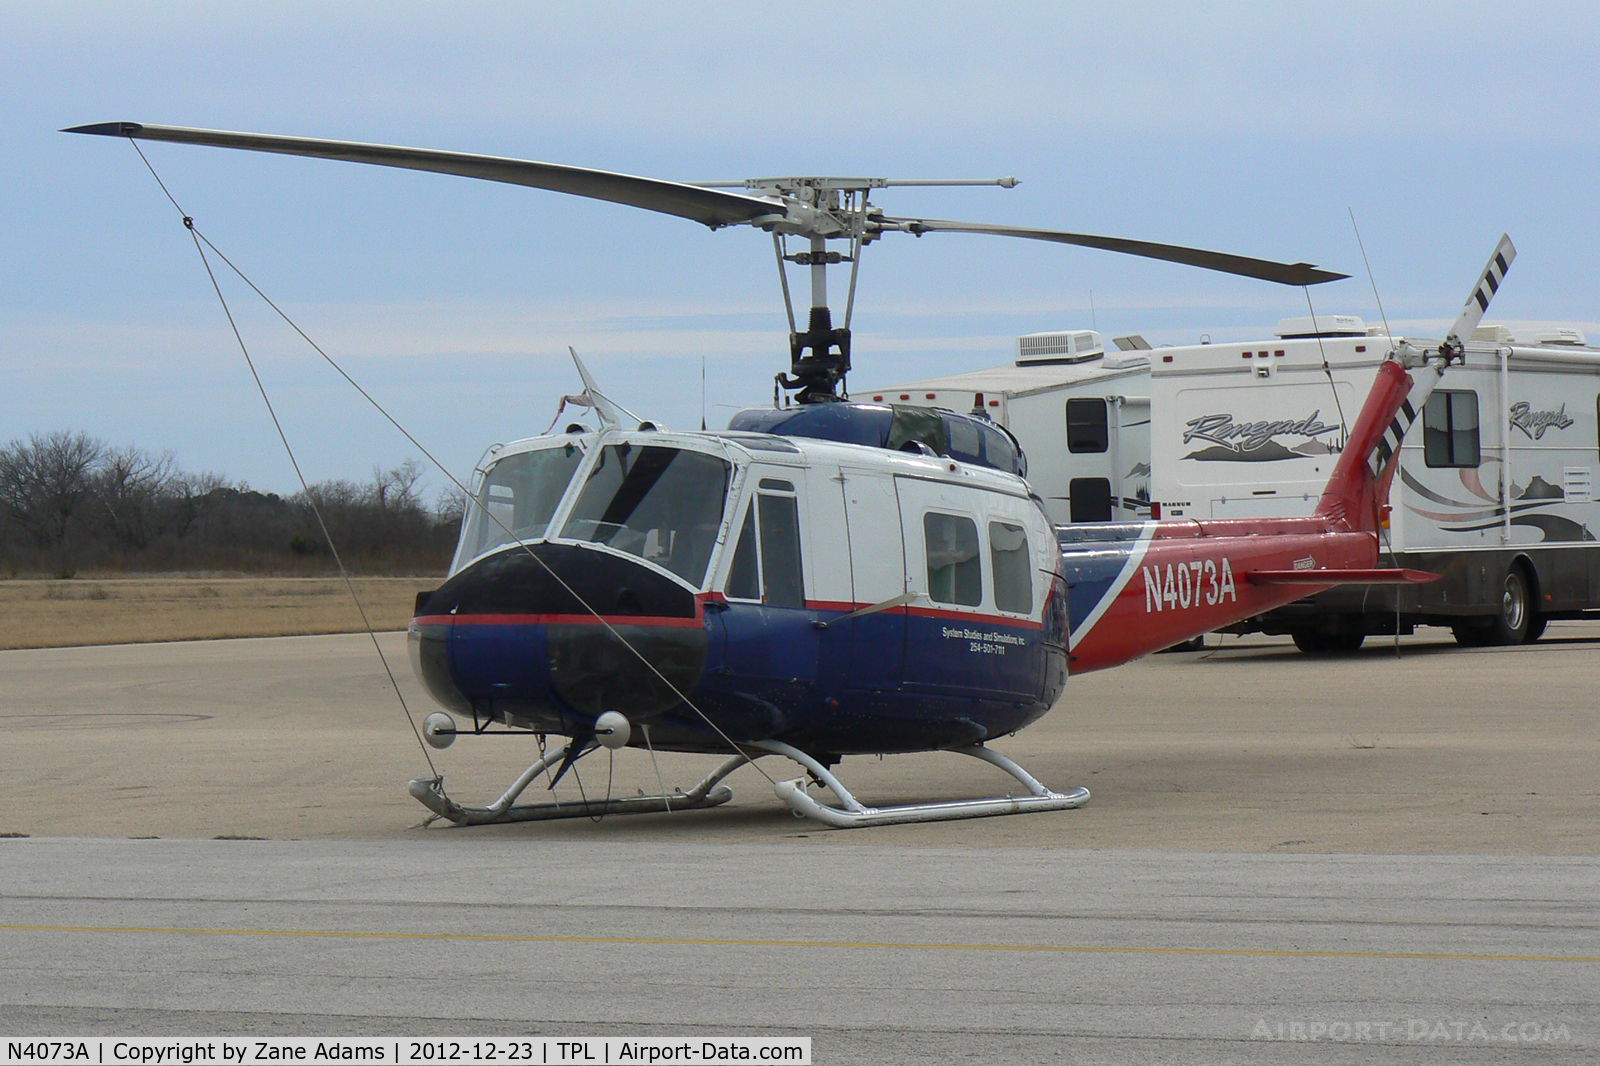 N4073A, 1969 Bell UH-1H Iroquois C/N 69-15075, Photographed at Draughon-Miller airport - Temple, TX